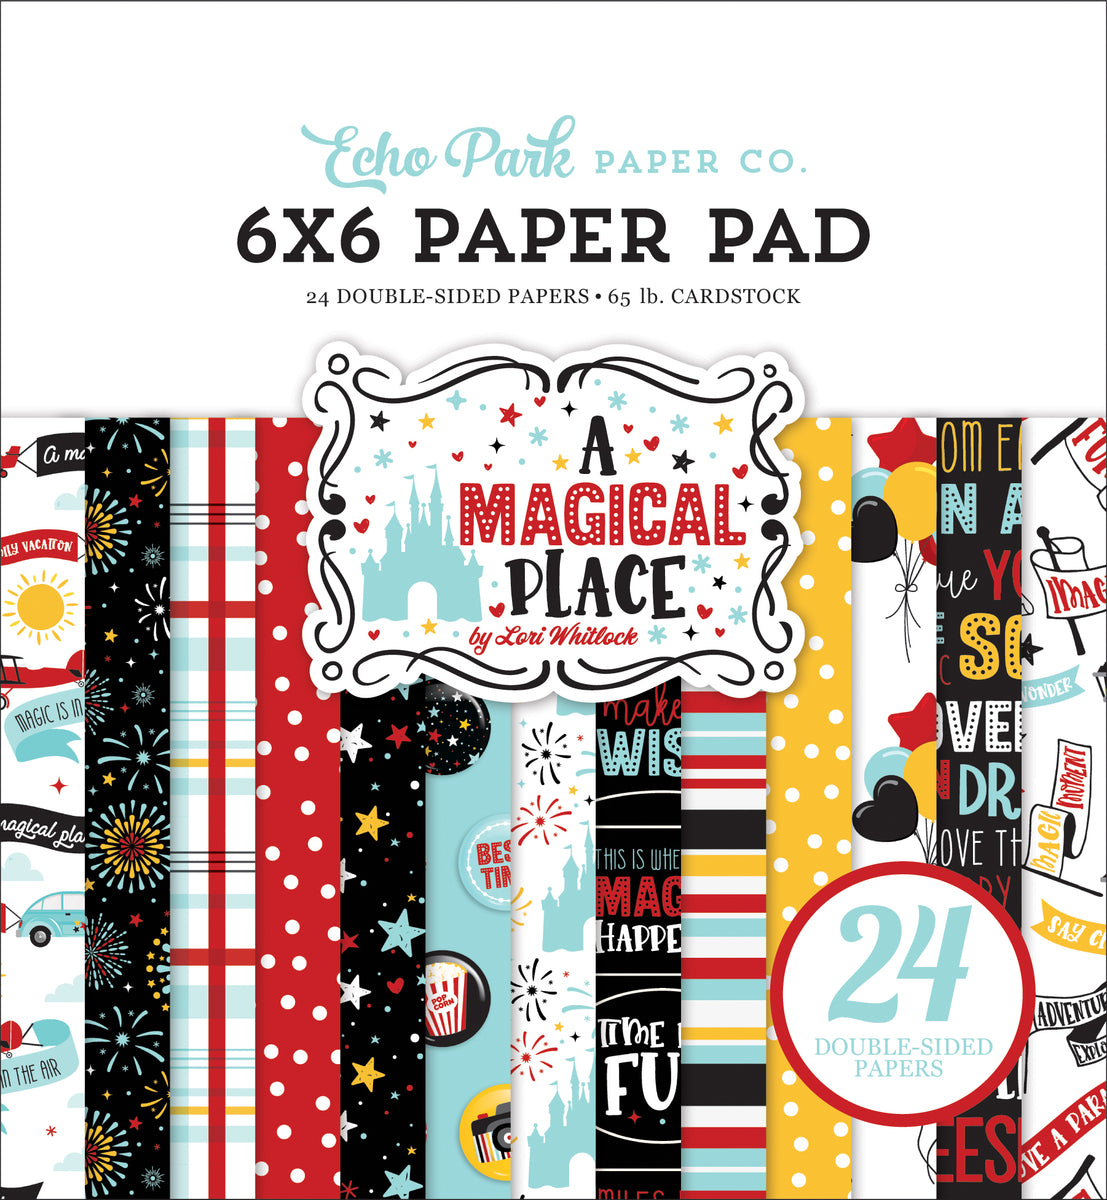 A Magical Place 6x6 patterned paper pad from Echo Park Paper